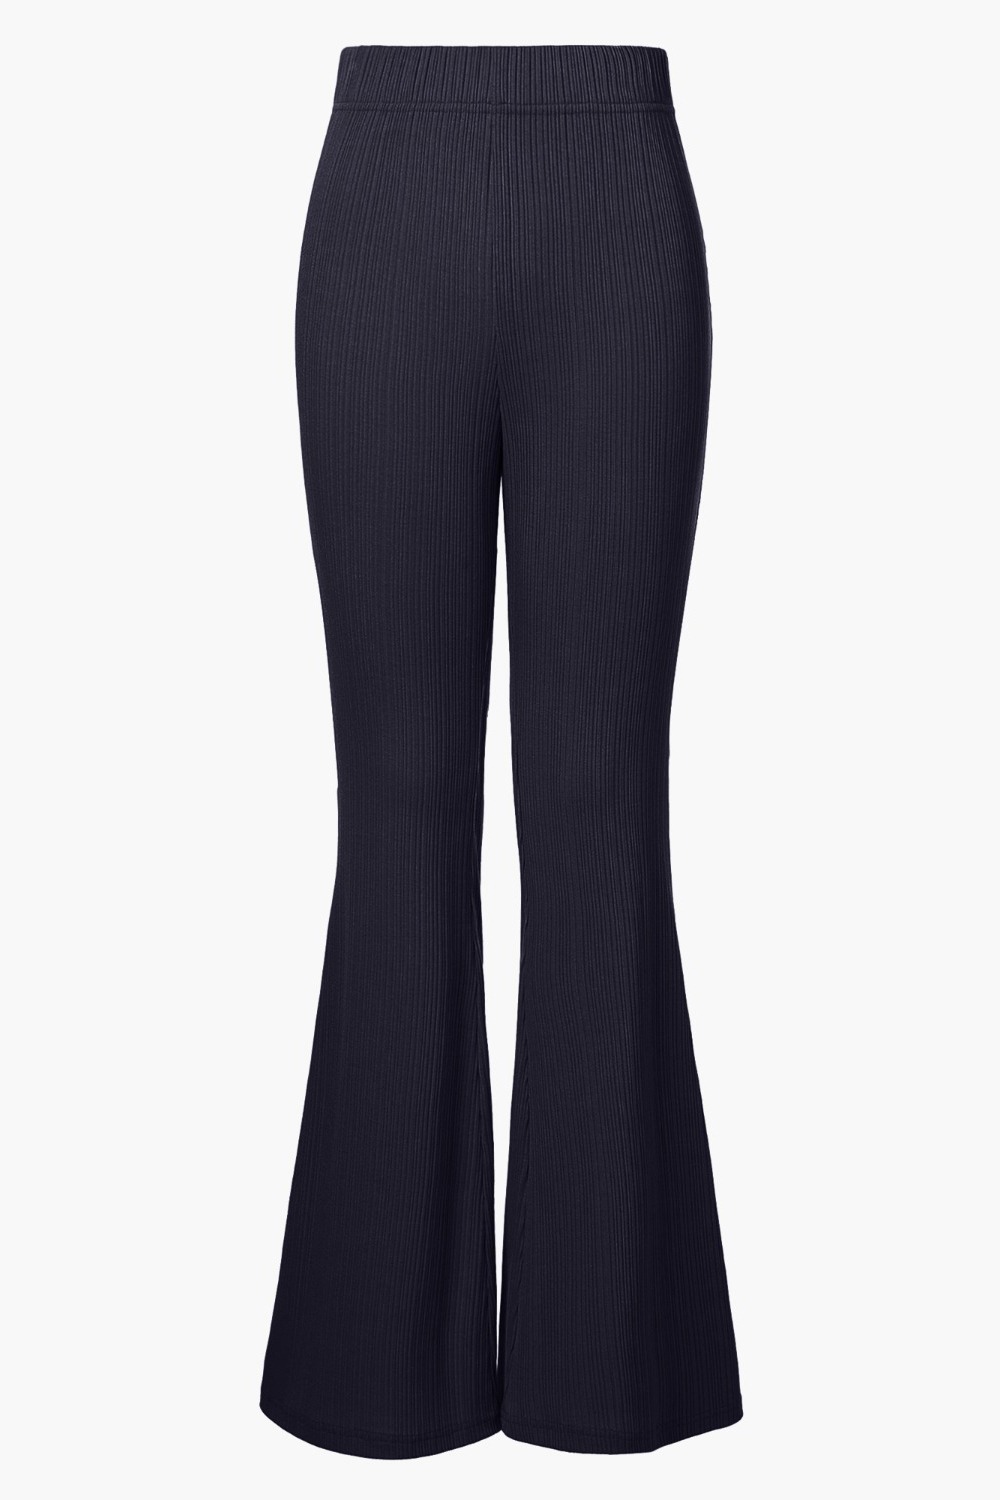 [Re-Stocked] FLARE SOFT TROUSERS, NAVY